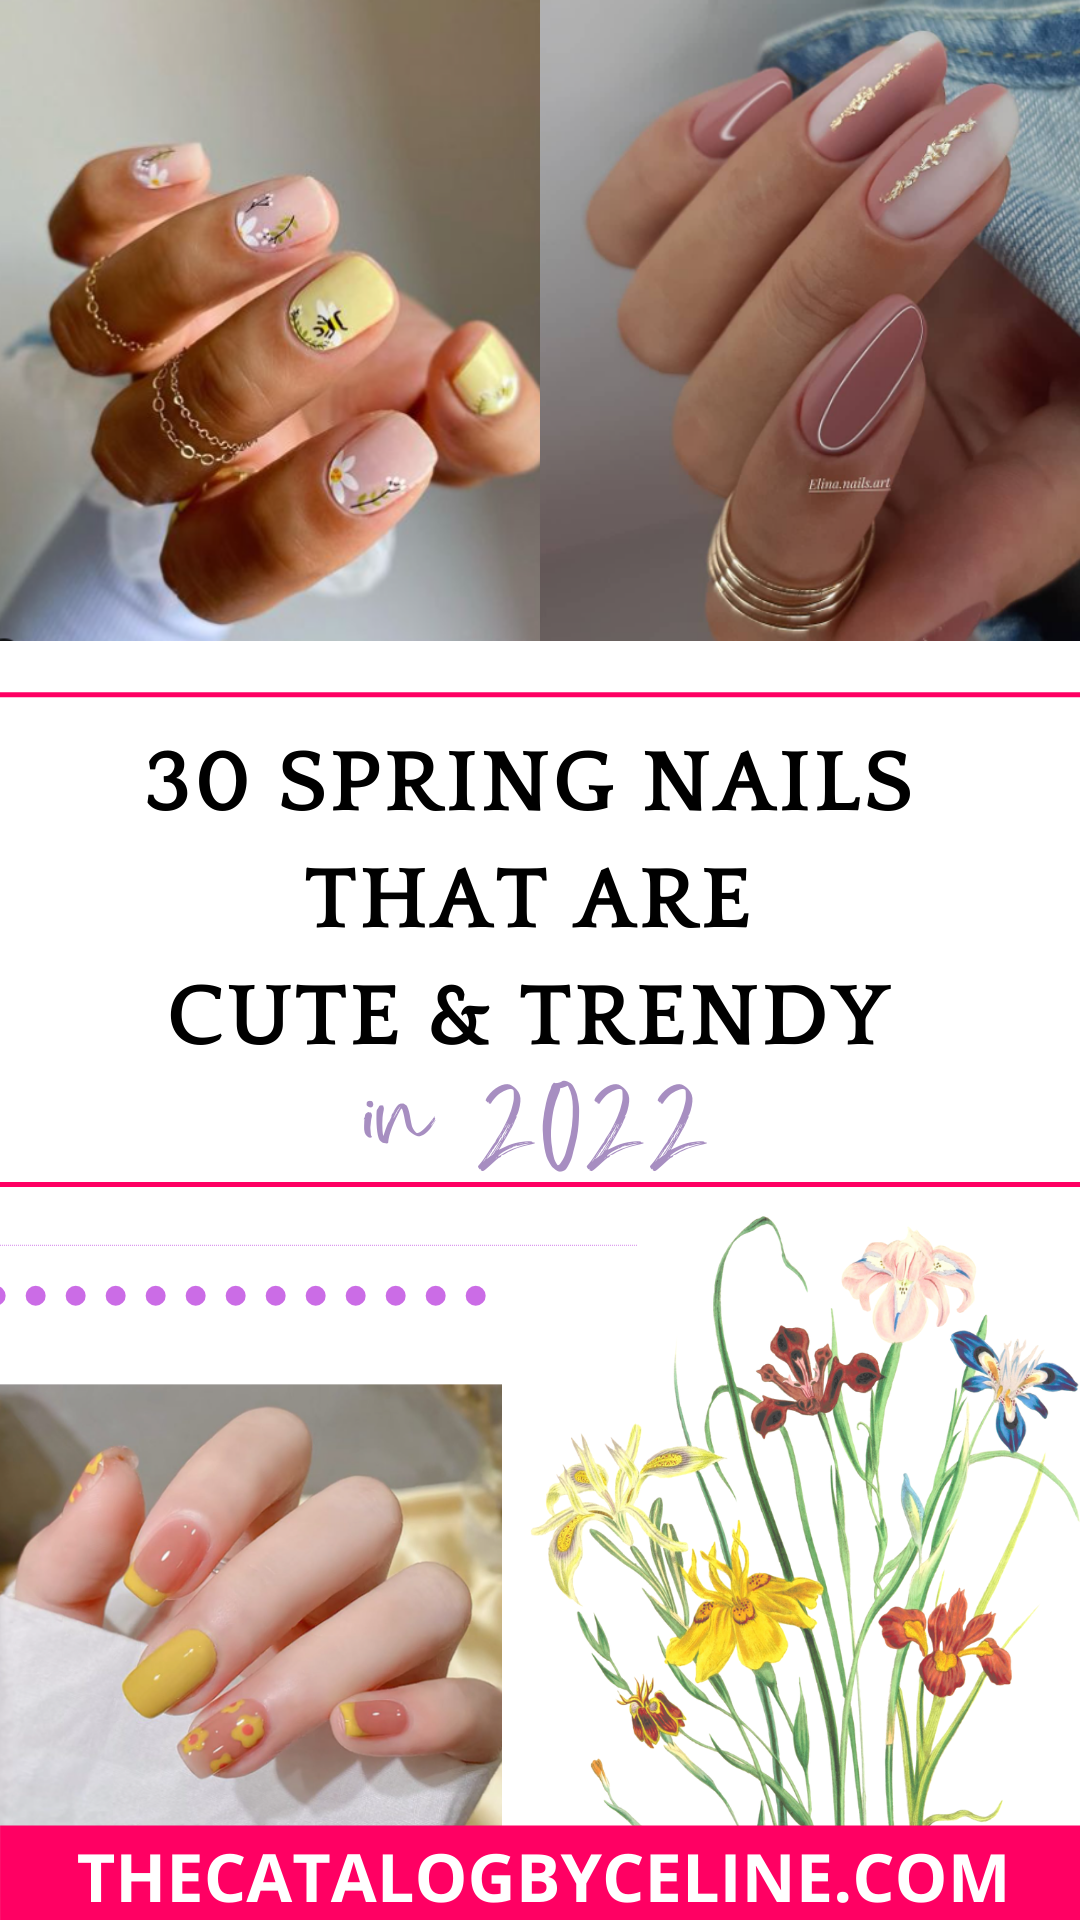 30 Best Spring Nails That are Cute & Trendy in 2022